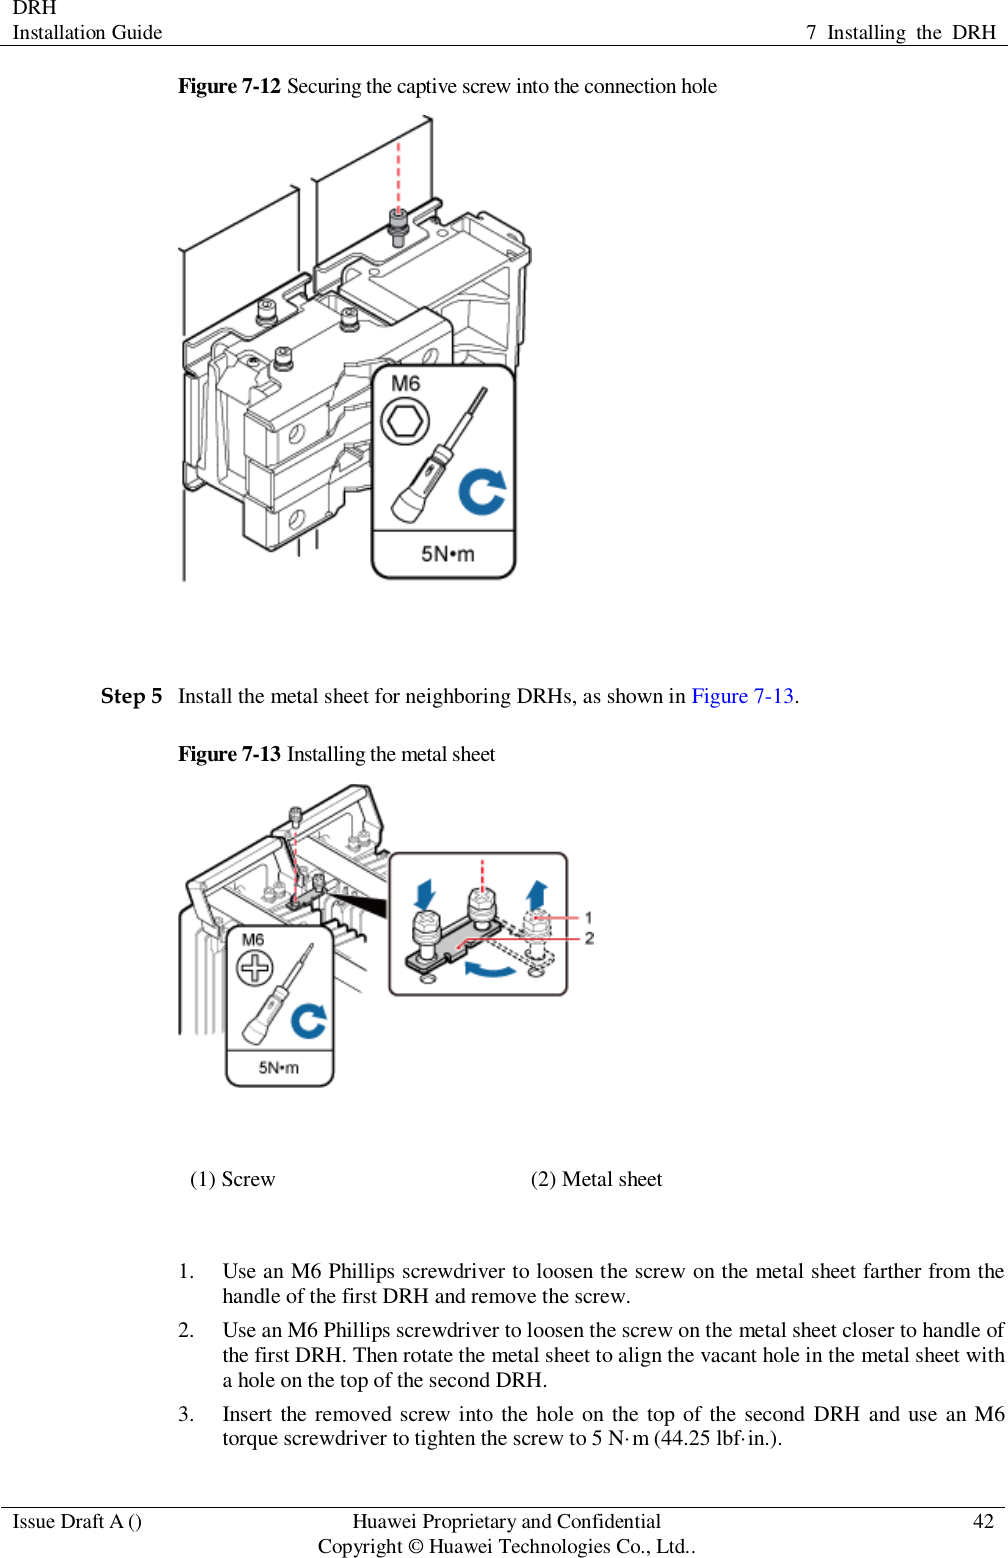 DRH   Installation Guide 7  Installing  the  DRH  Issue Draft A () Huawei Proprietary and Confidential                                     Copyright © Huawei Technologies Co., Ltd.. 42  Figure 7-12 Securing the captive screw into the connection hole   Step 5 Install the metal sheet for neighboring DRHs, as shown in Figure 7-13. Figure 7-13 Installing the metal sheet  (1) Screw (2) Metal sheet  1. Use an M6 Phillips screwdriver to loosen the screw on the metal sheet farther from the handle of the first DRH and remove the screw. 2. Use an M6 Phillips screwdriver to loosen the screw on the metal sheet closer to handle of the first DRH. Then rotate the metal sheet to align the vacant hole in the metal sheet with a hole on the top of the second DRH. 3. Insert the removed  screw into  the hole on the top of the second  DRH  and use an M6 torque screwdriver to tighten the screw to 5 N·m (44.25 lbf·in.). 